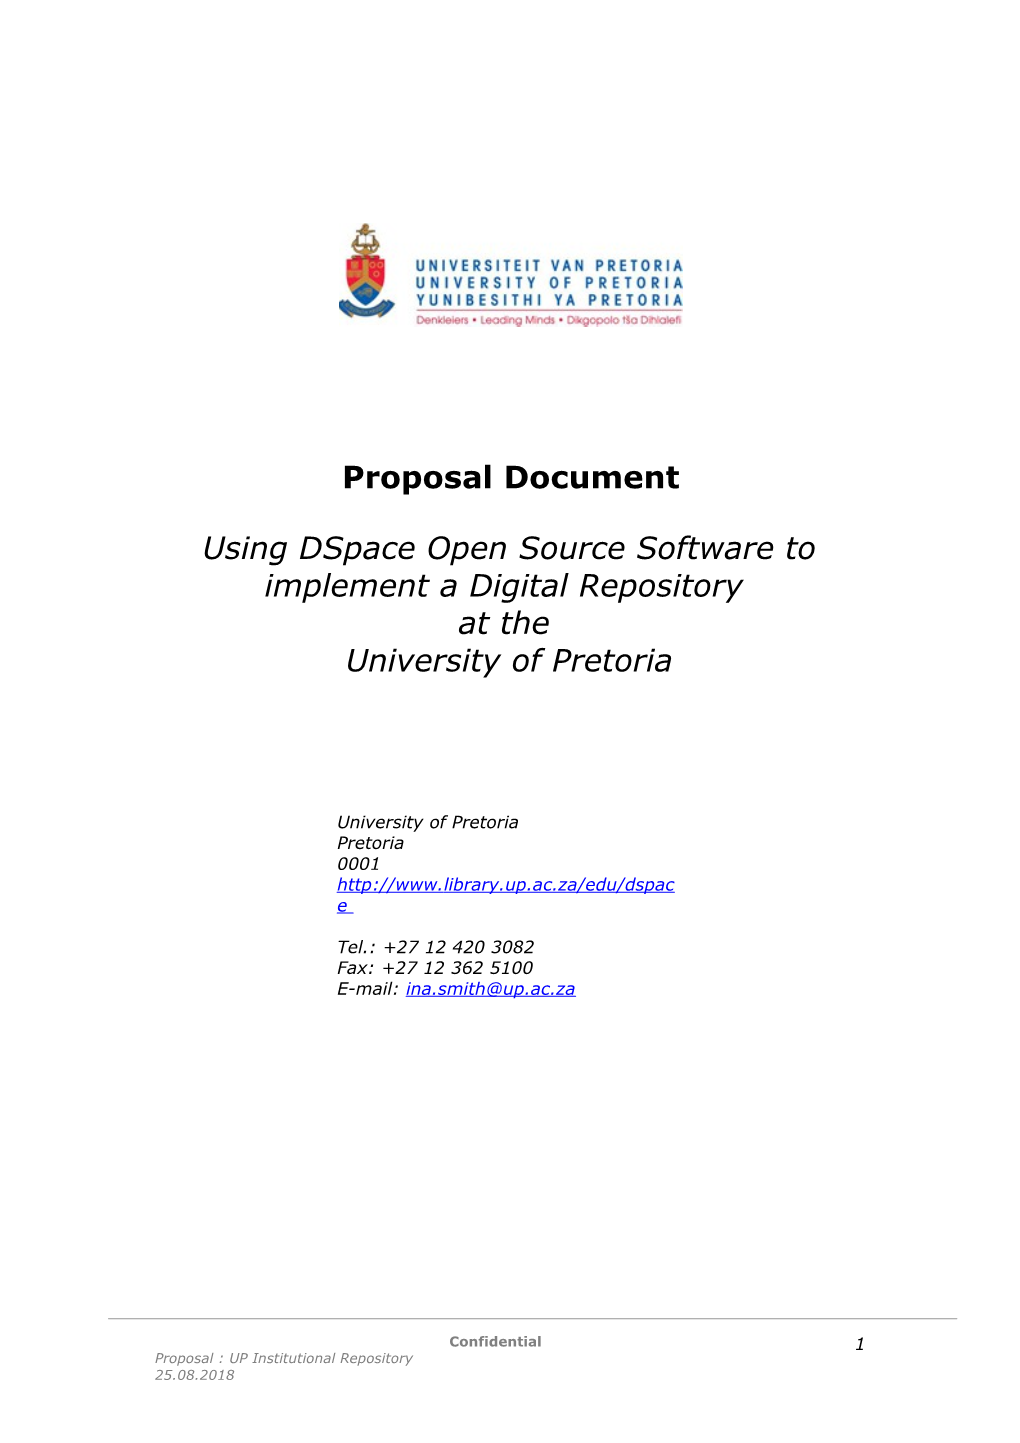 Using Dspace Open Source Software to Implement a Digital Repository